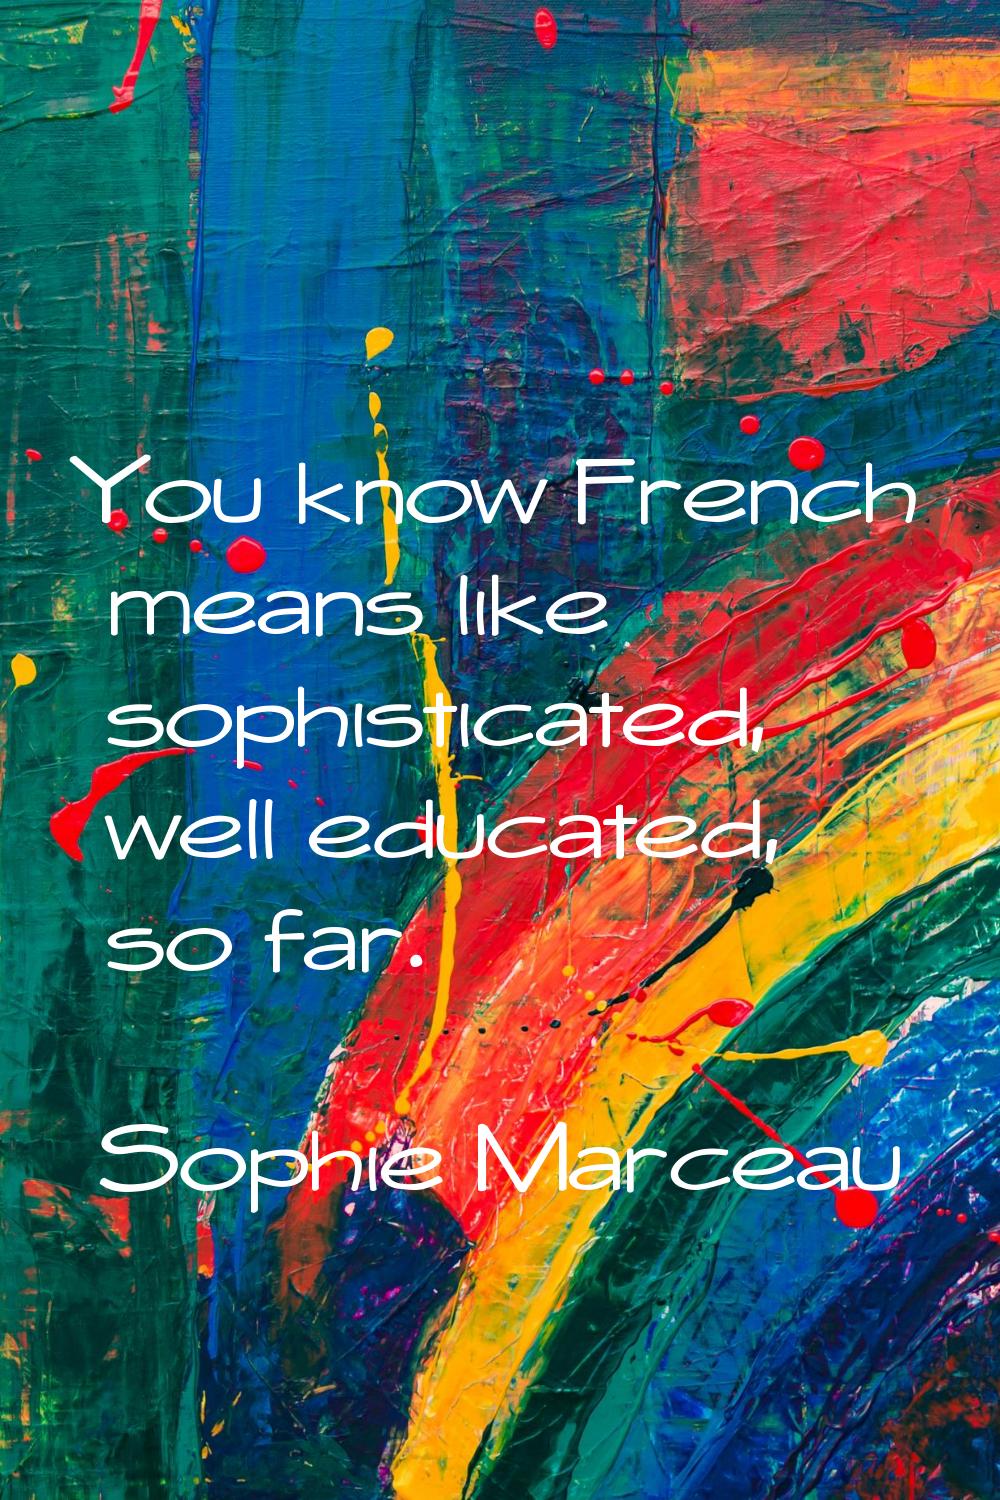 You know French means like sophisticated, well educated, so far.